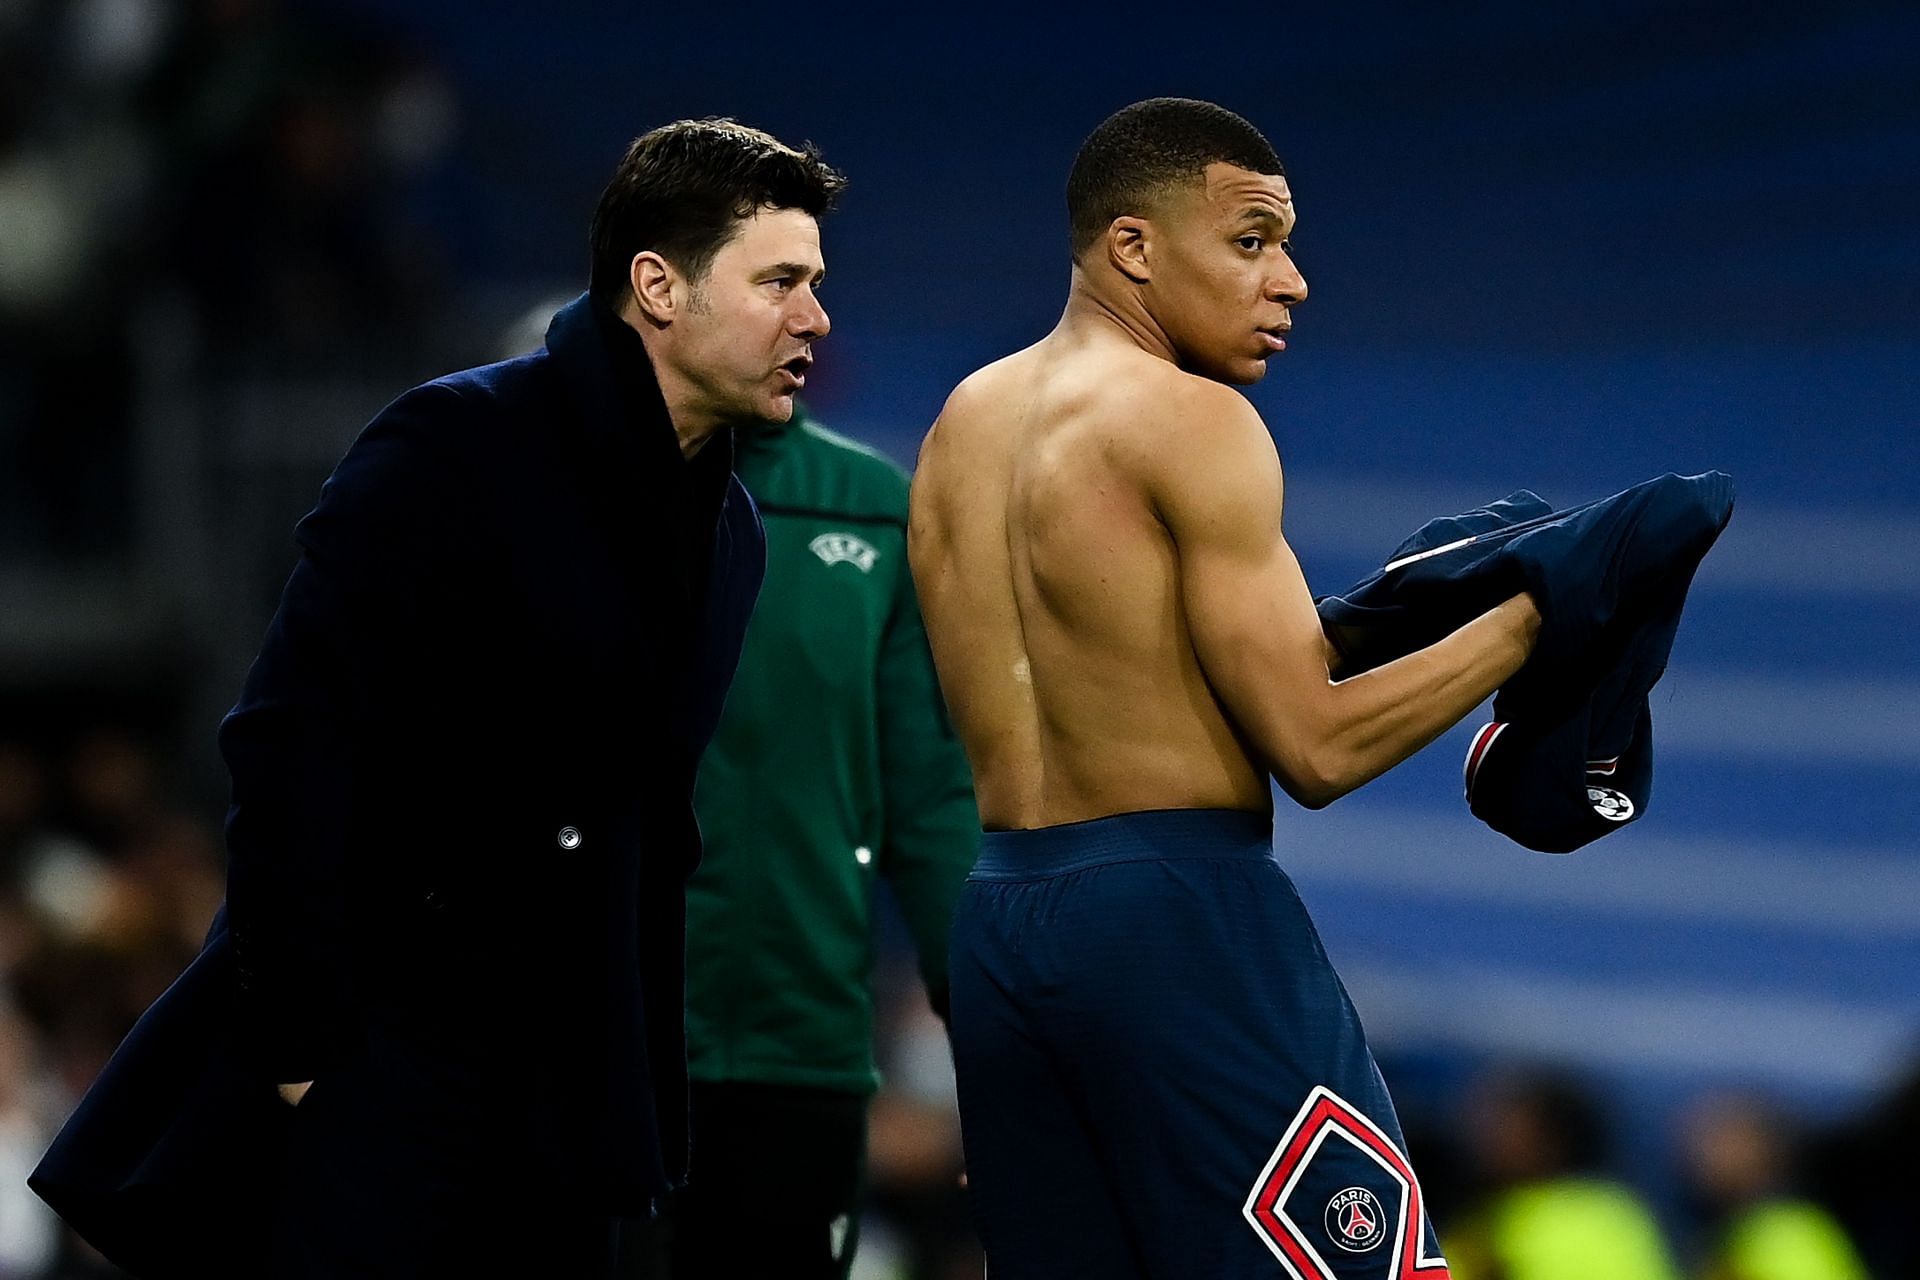 Kylian Mbappe has a strong relationship with his manager